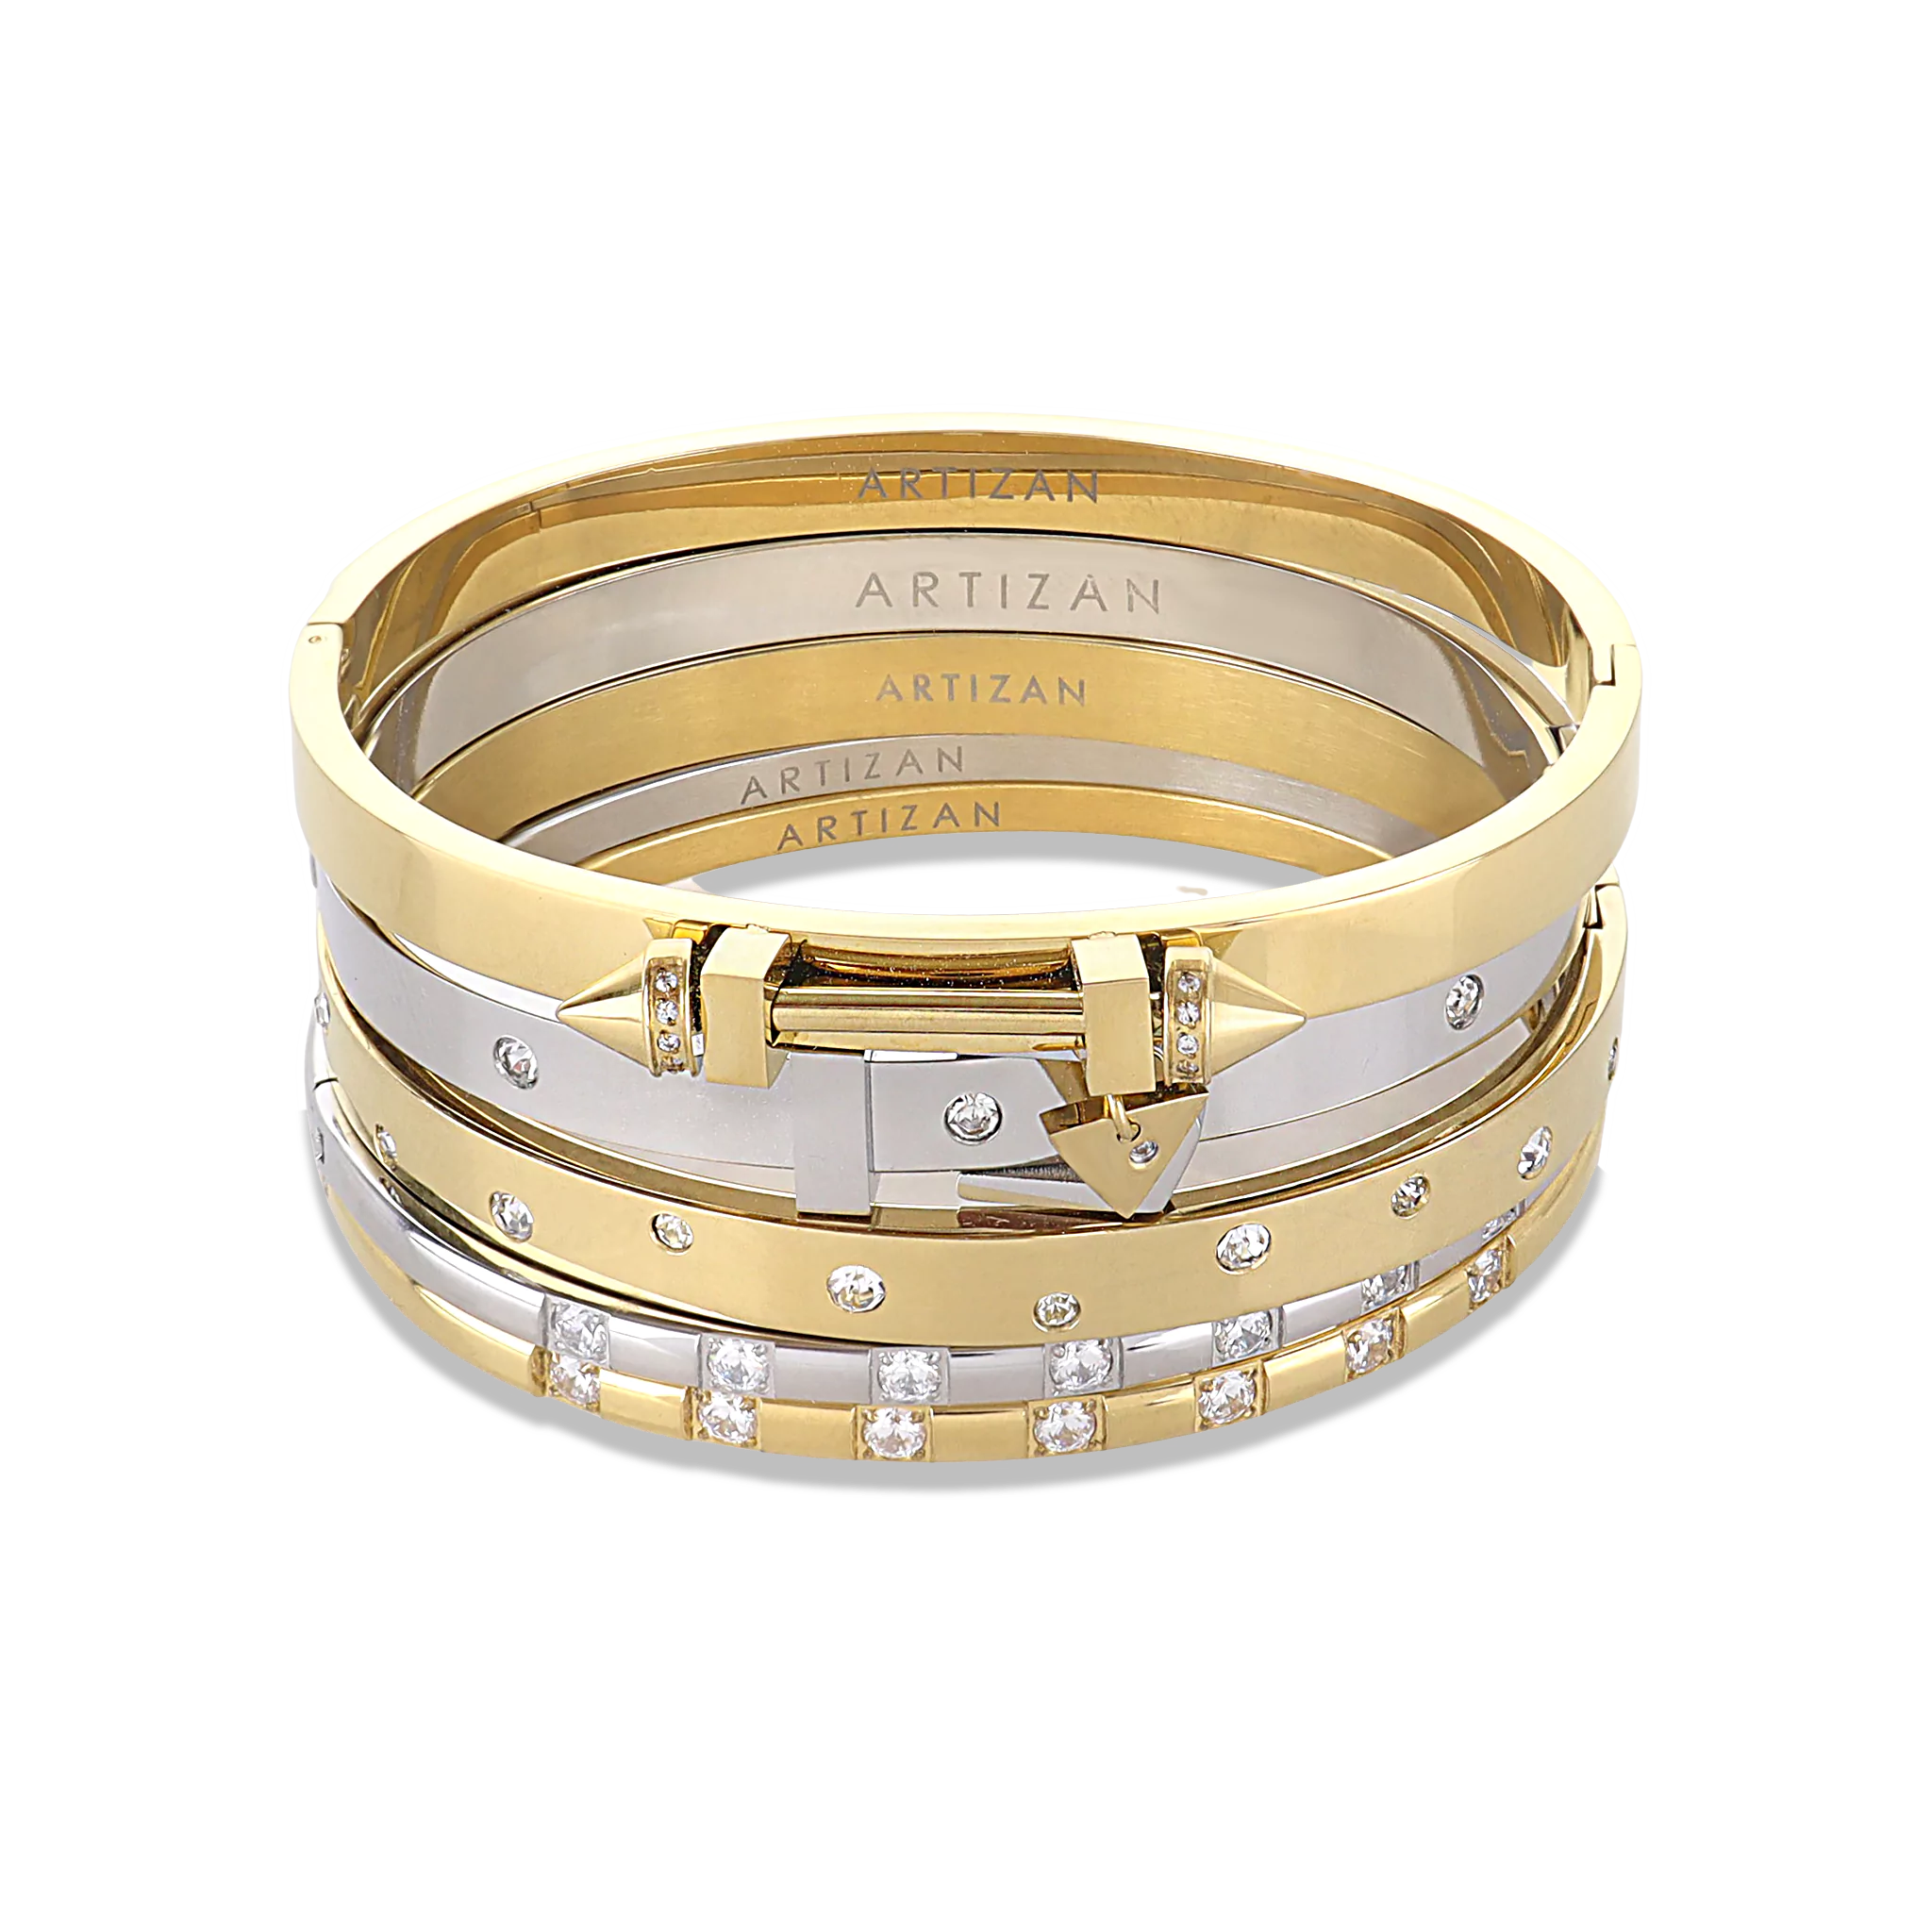 How To: Cartier LOVE Bracelet Stack